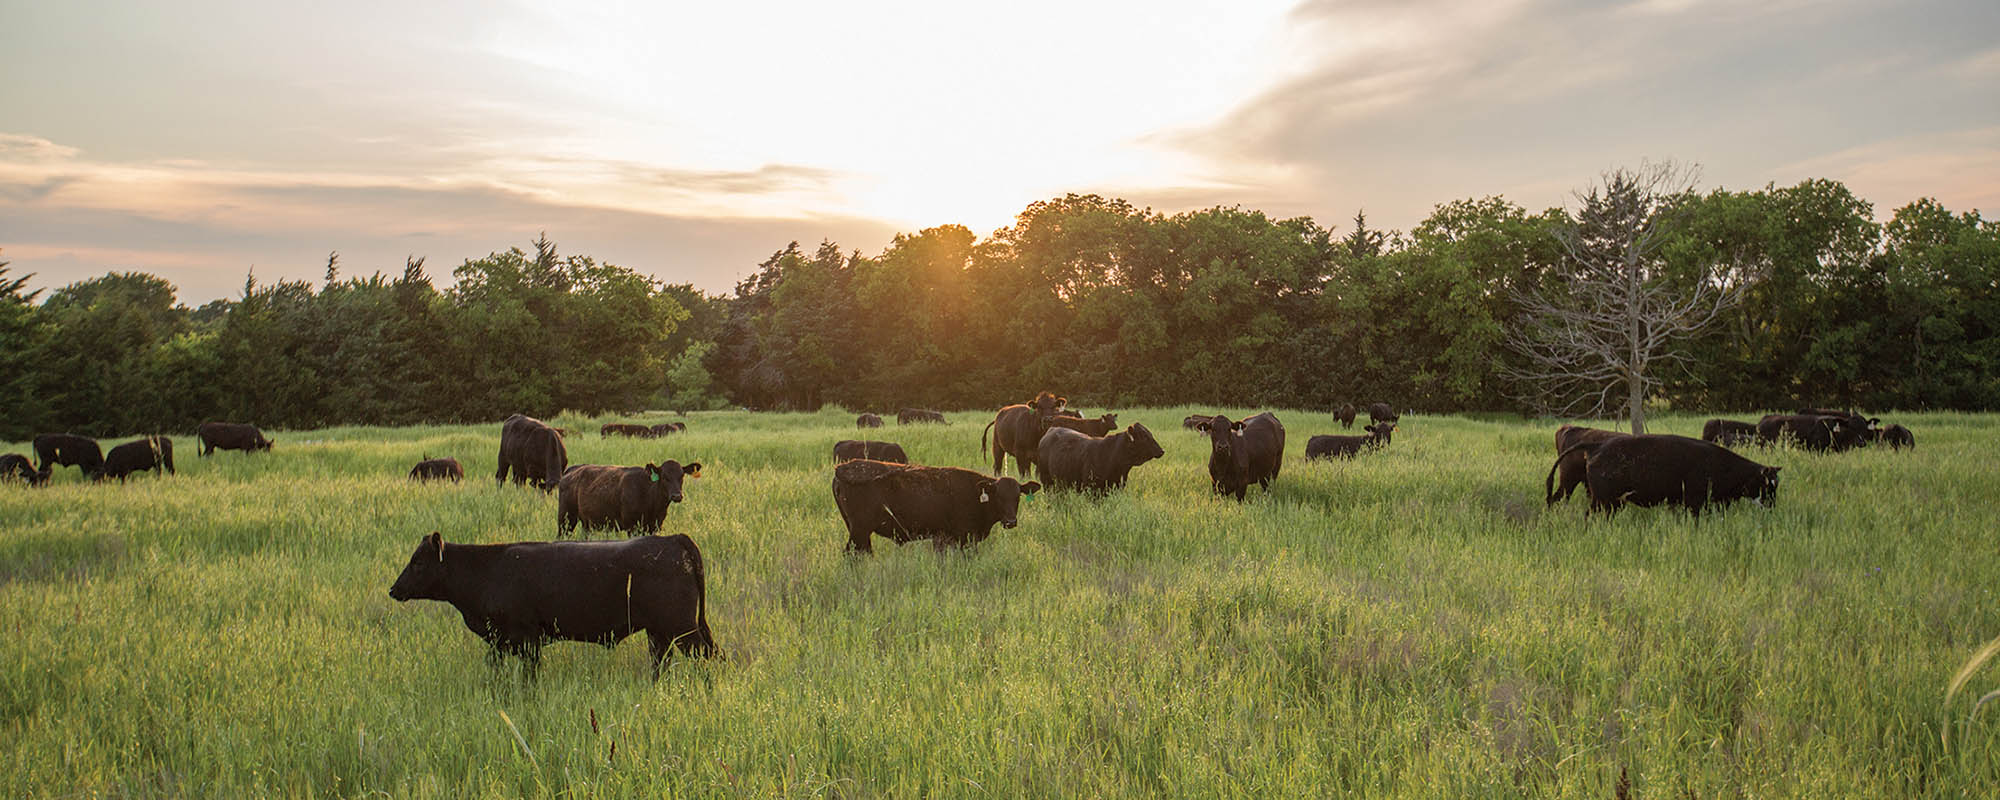 Cattle grazing in field at sunset